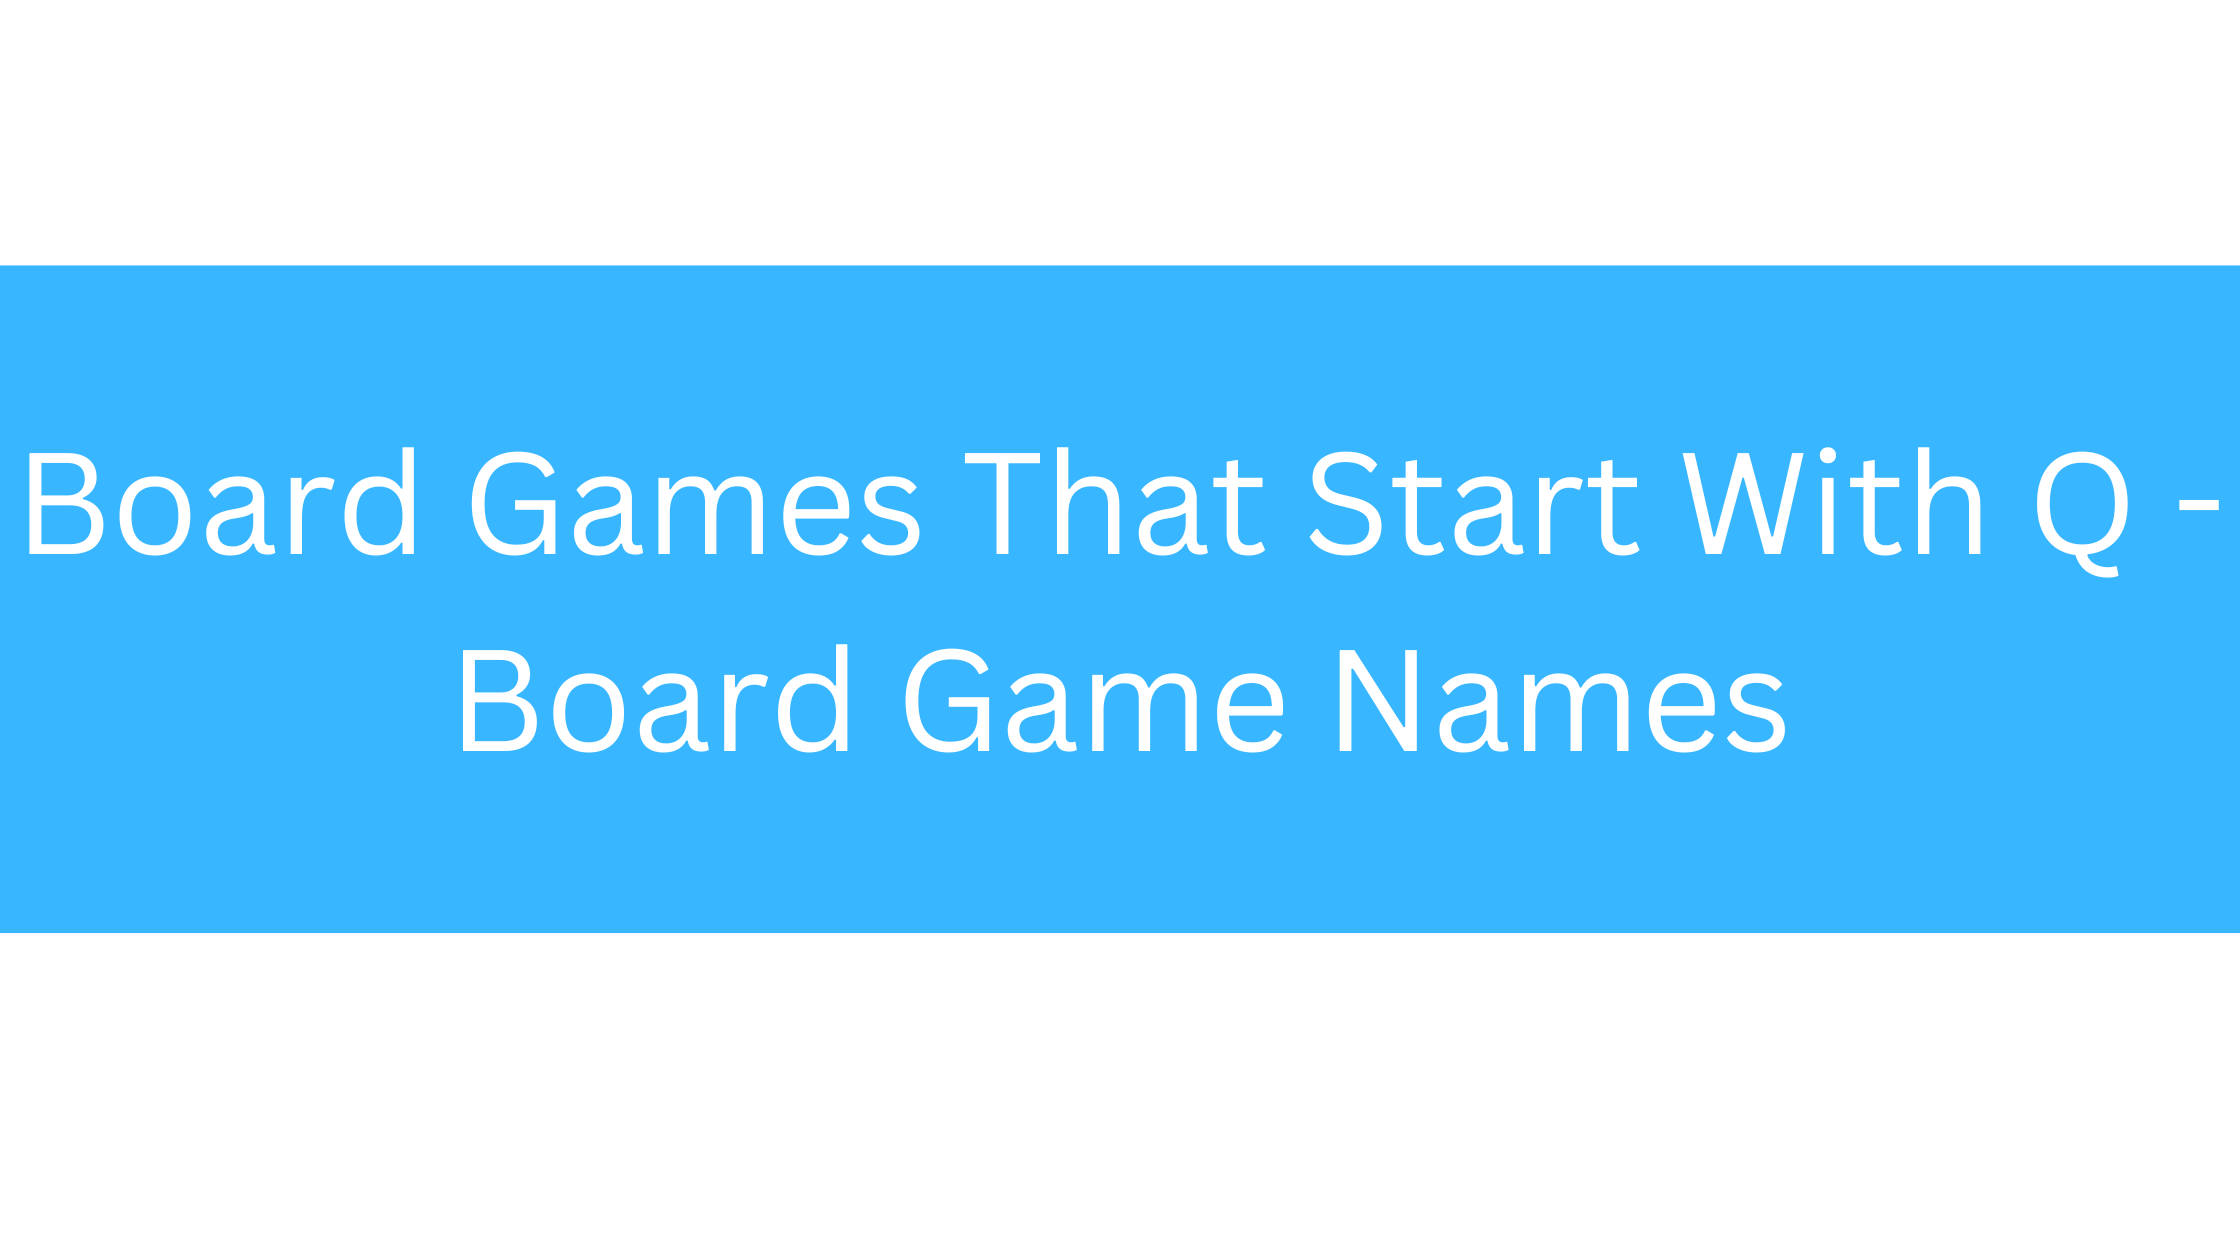 Board Games That Start With Q